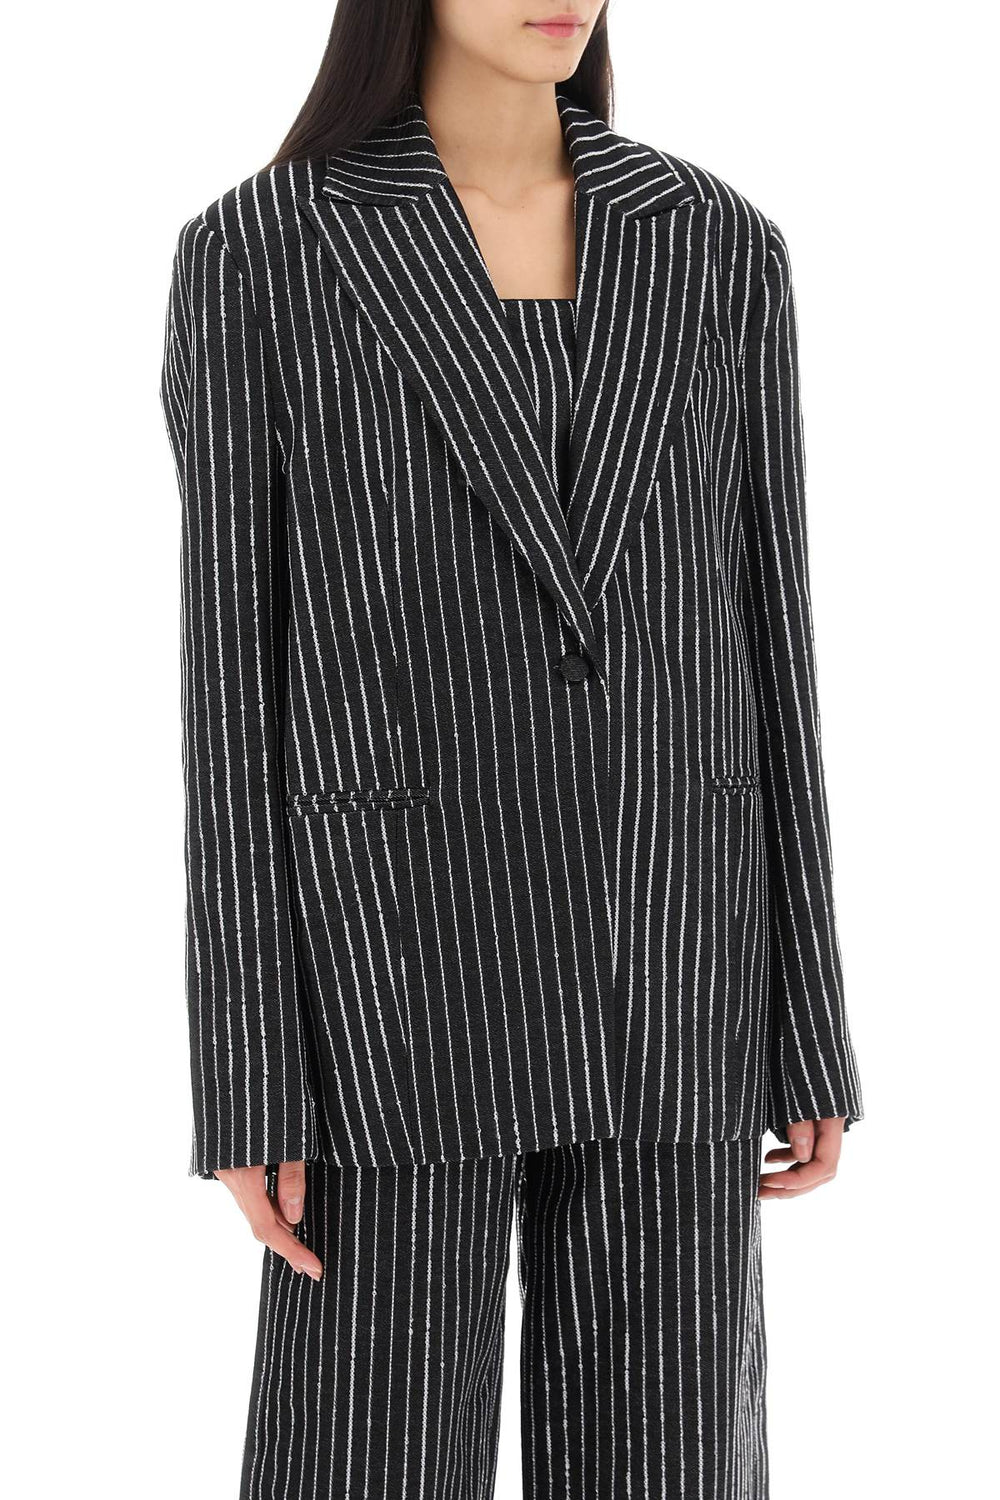 blazer with sequined stripes-1